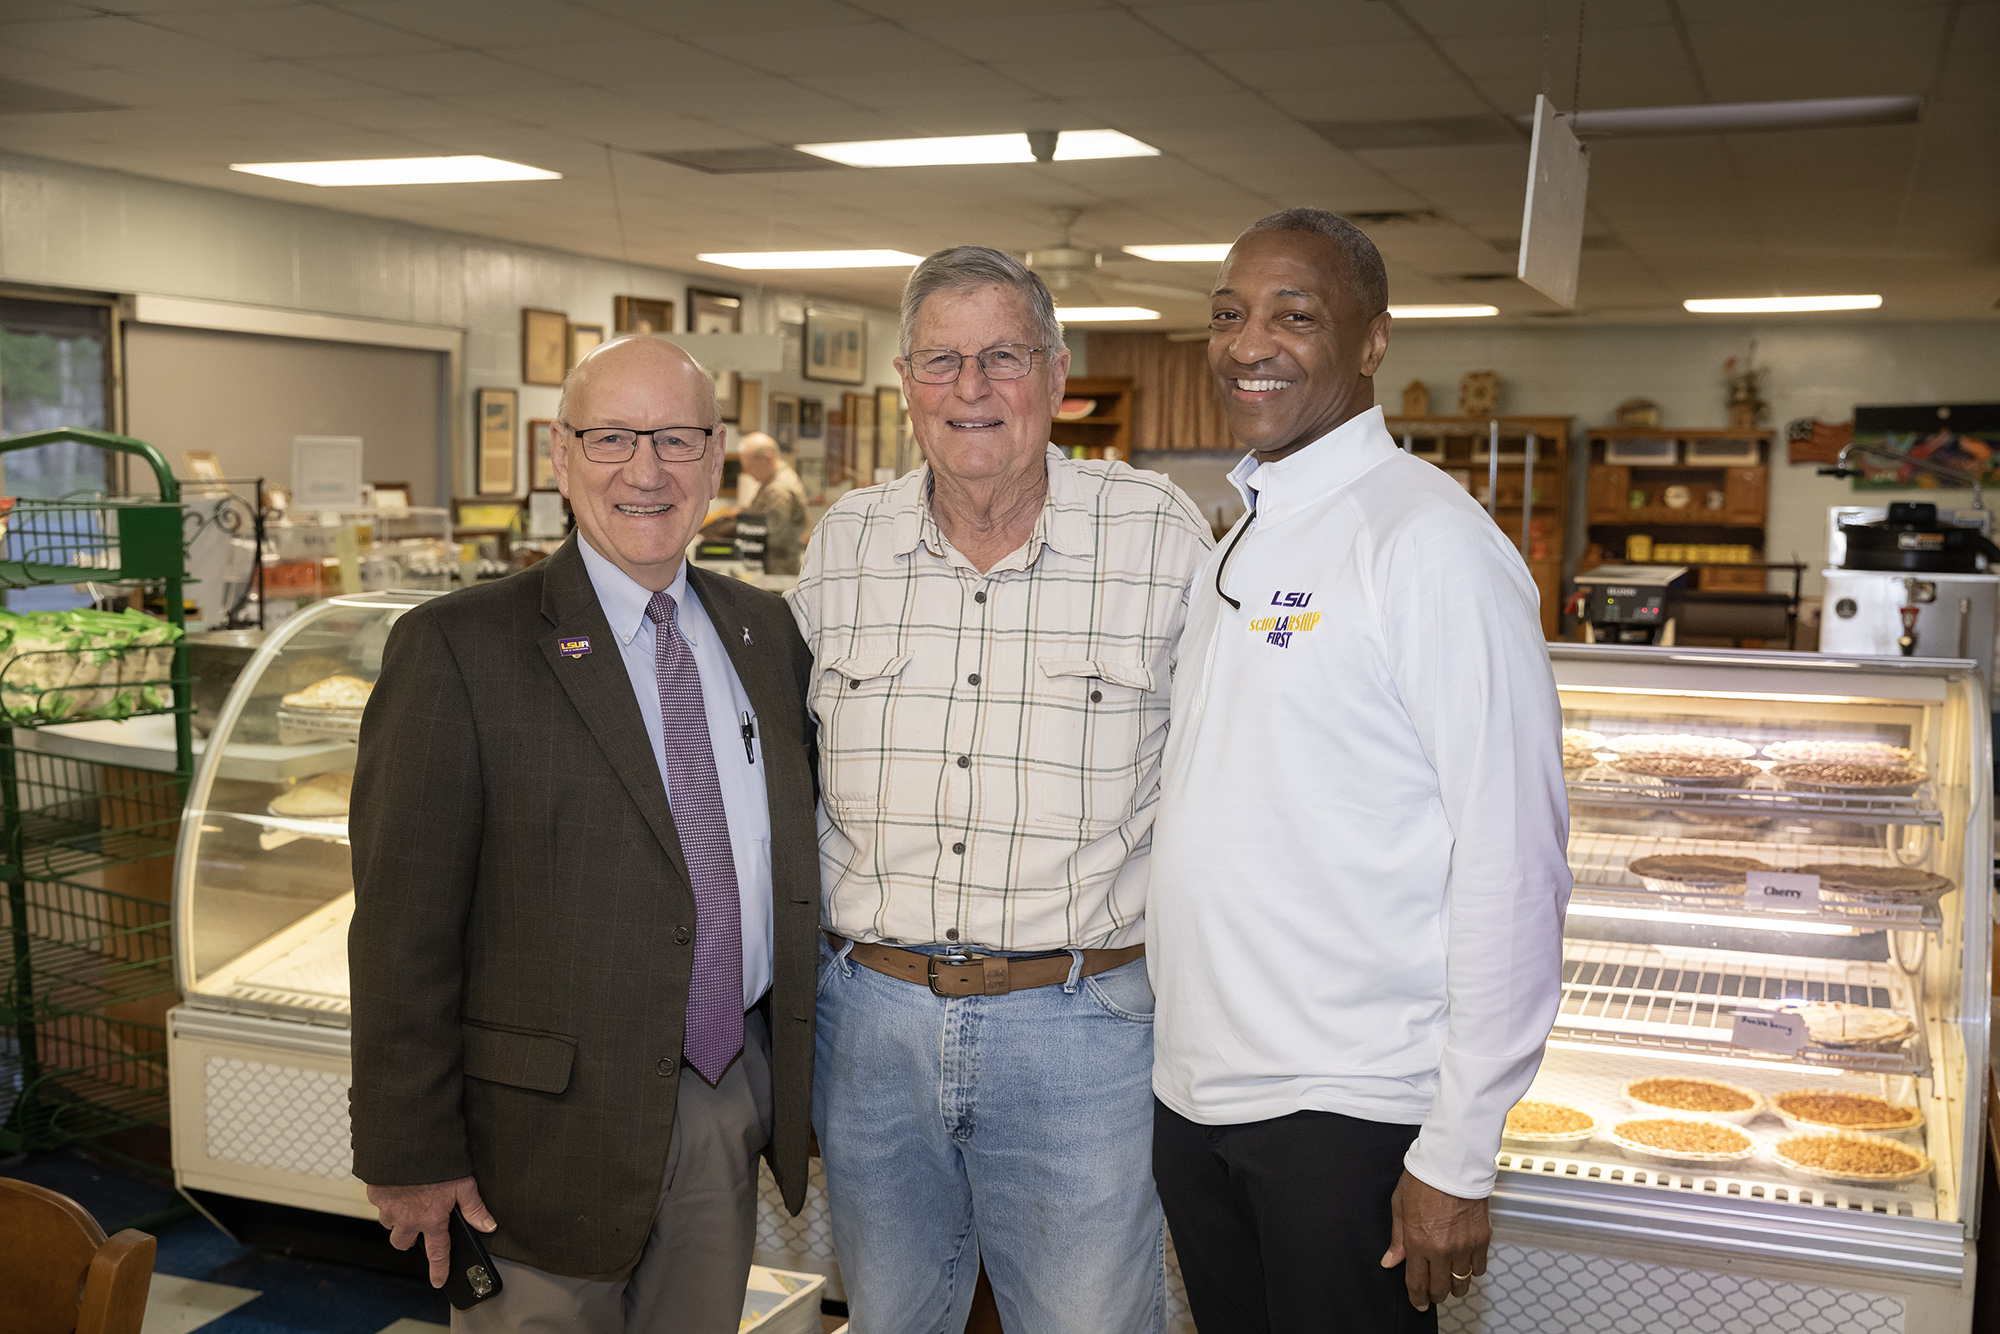 President Tate with two men inside Lea's Lunchroom